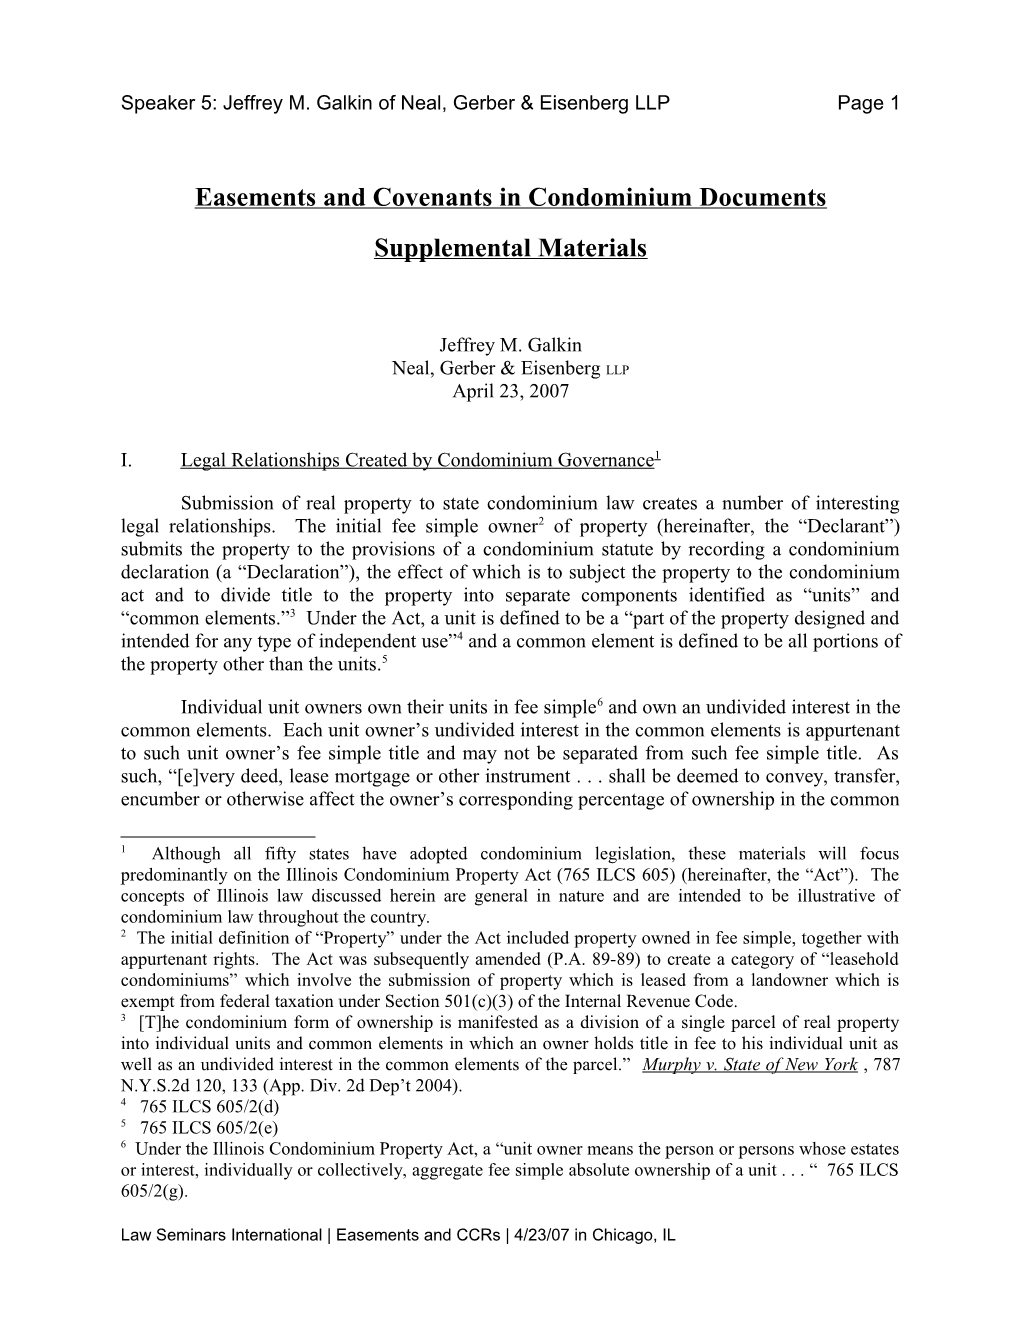 Easements and Covenants in Condominium Documents